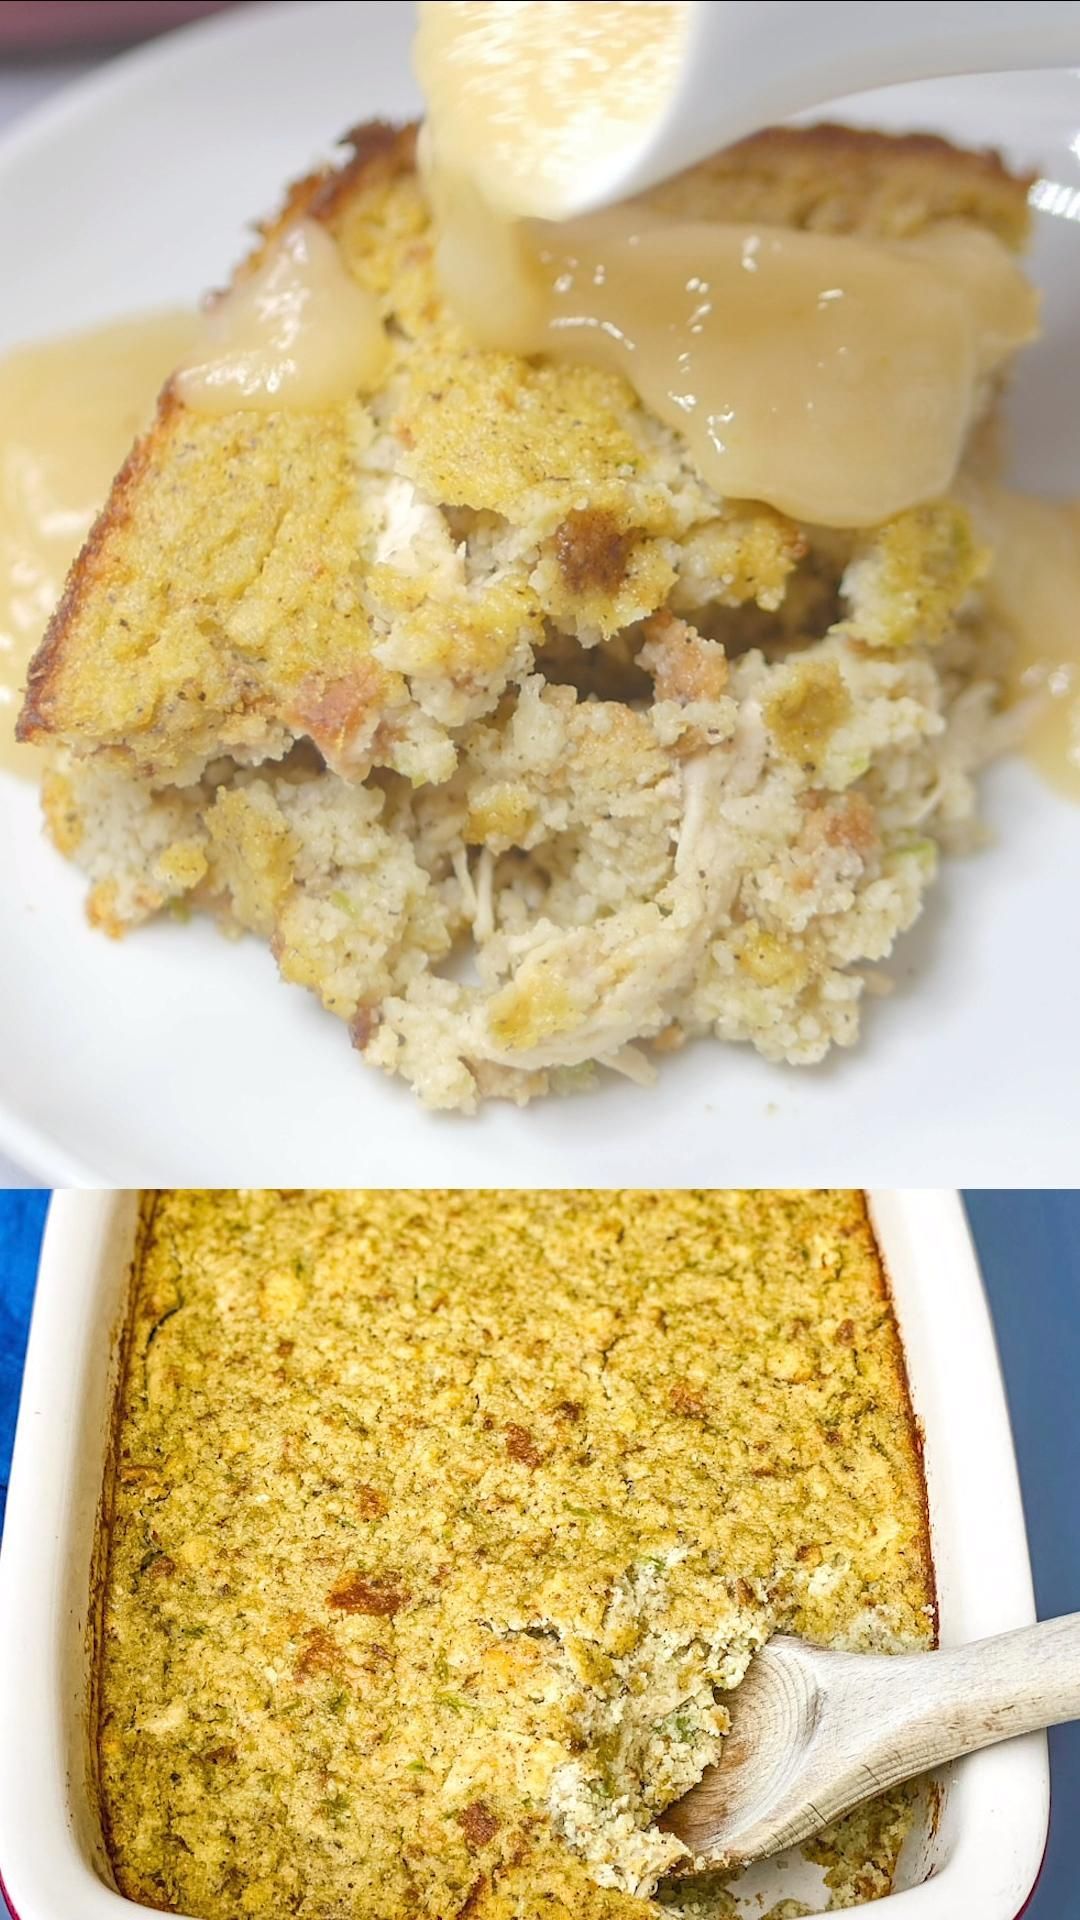 Easy Southern Cornbread Dressing -   19 dressing recipes thanksgiving southern easy ideas